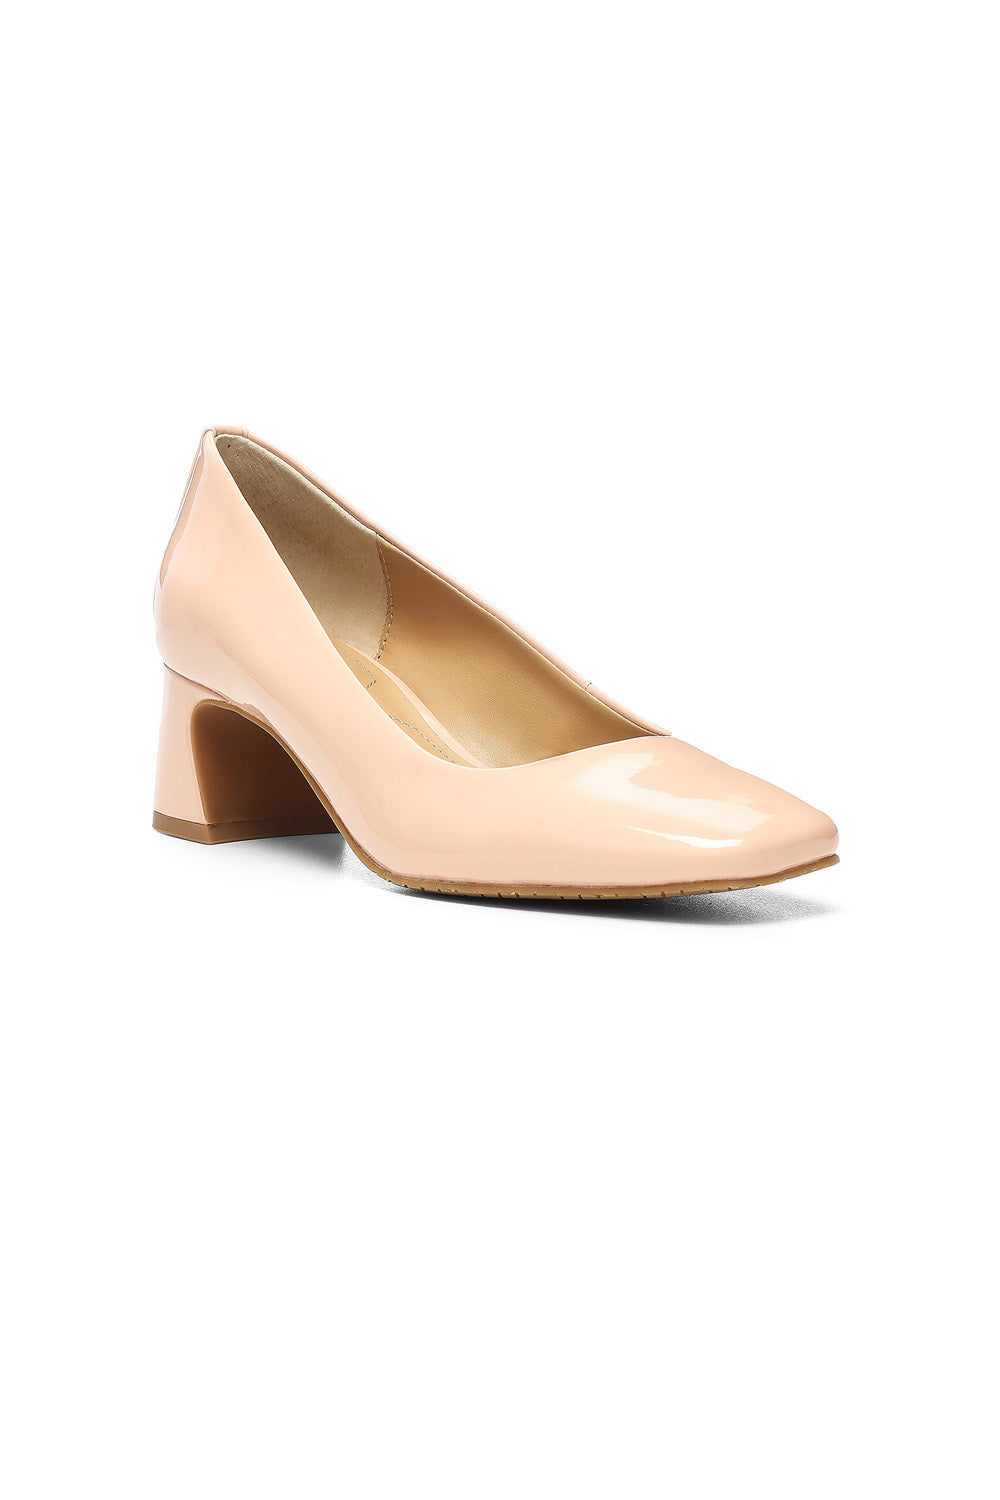 NYDJ Fay Pumps In Patent Leather - Dusty Rose